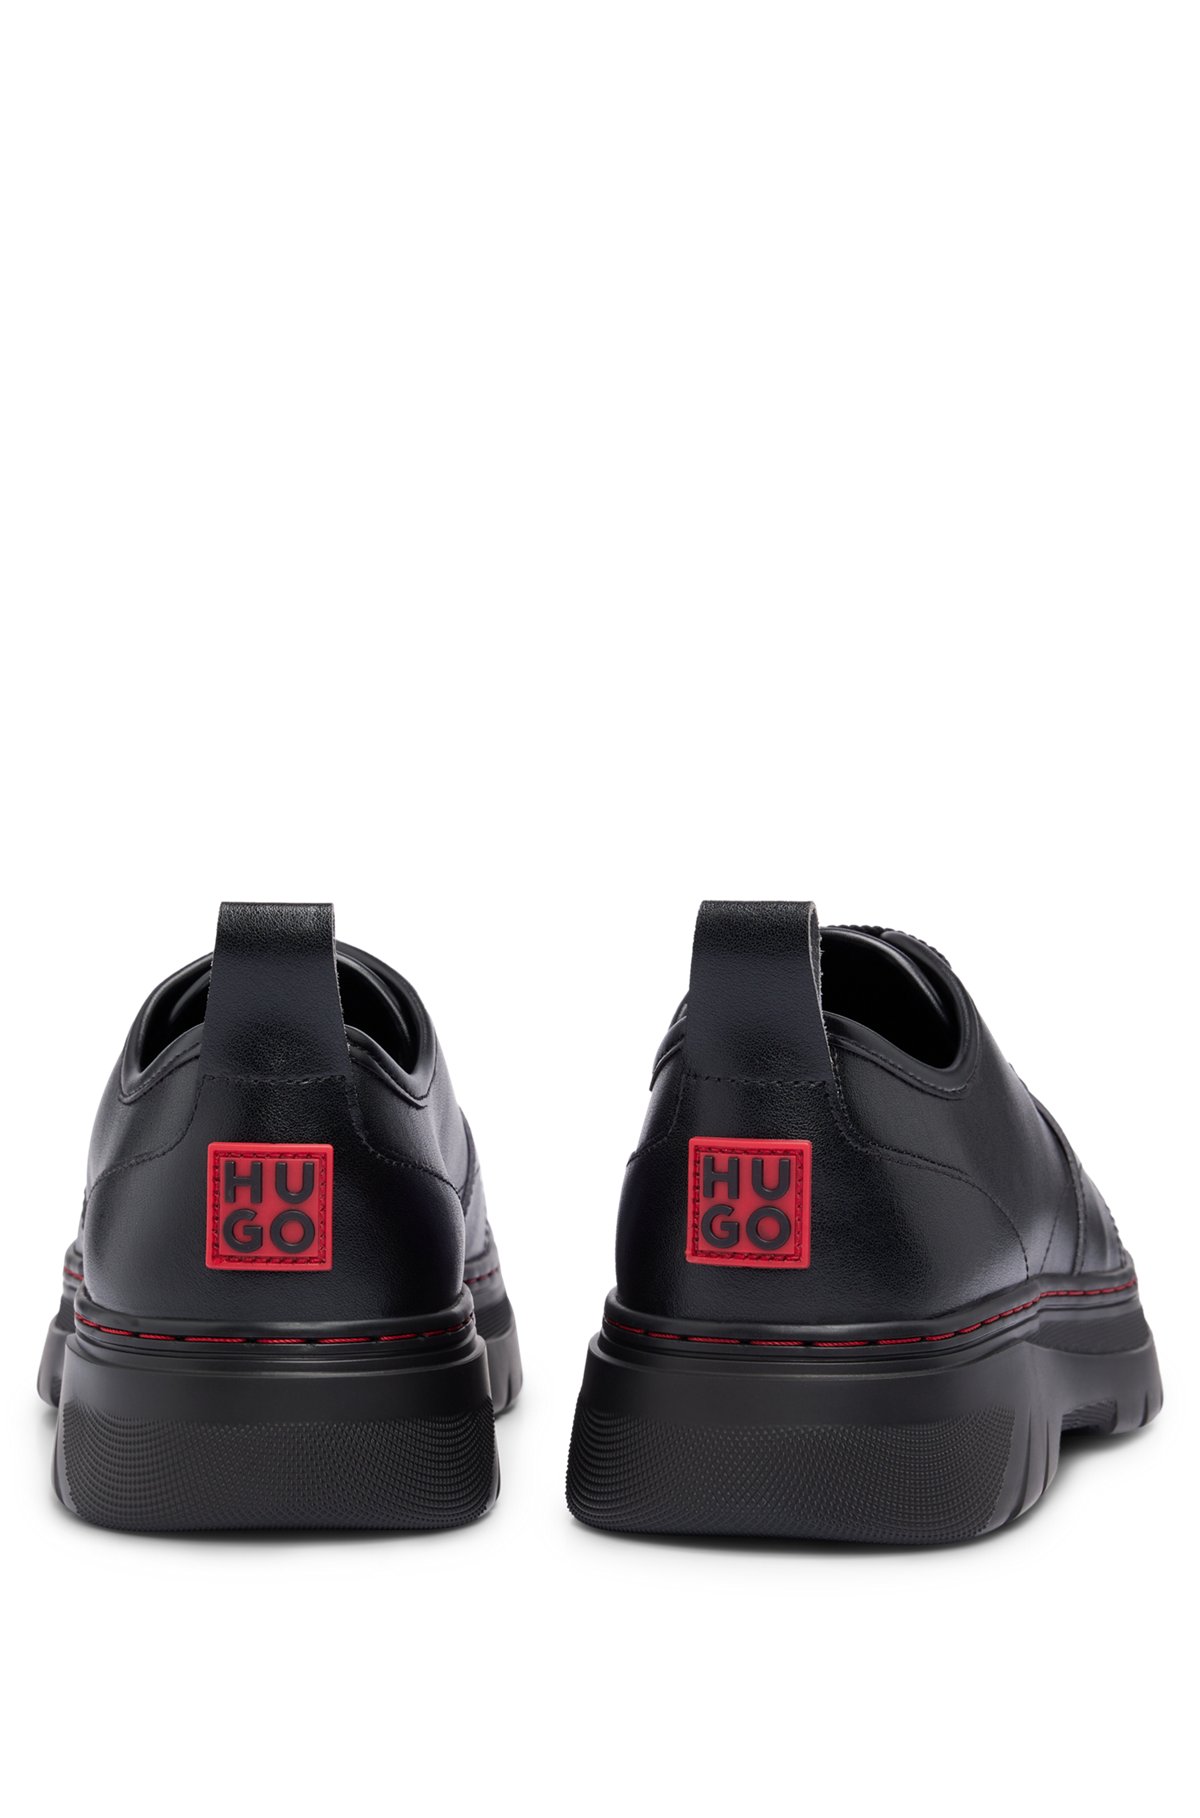 Leather Oxford shoes with stacked logo and EVA sole, Black